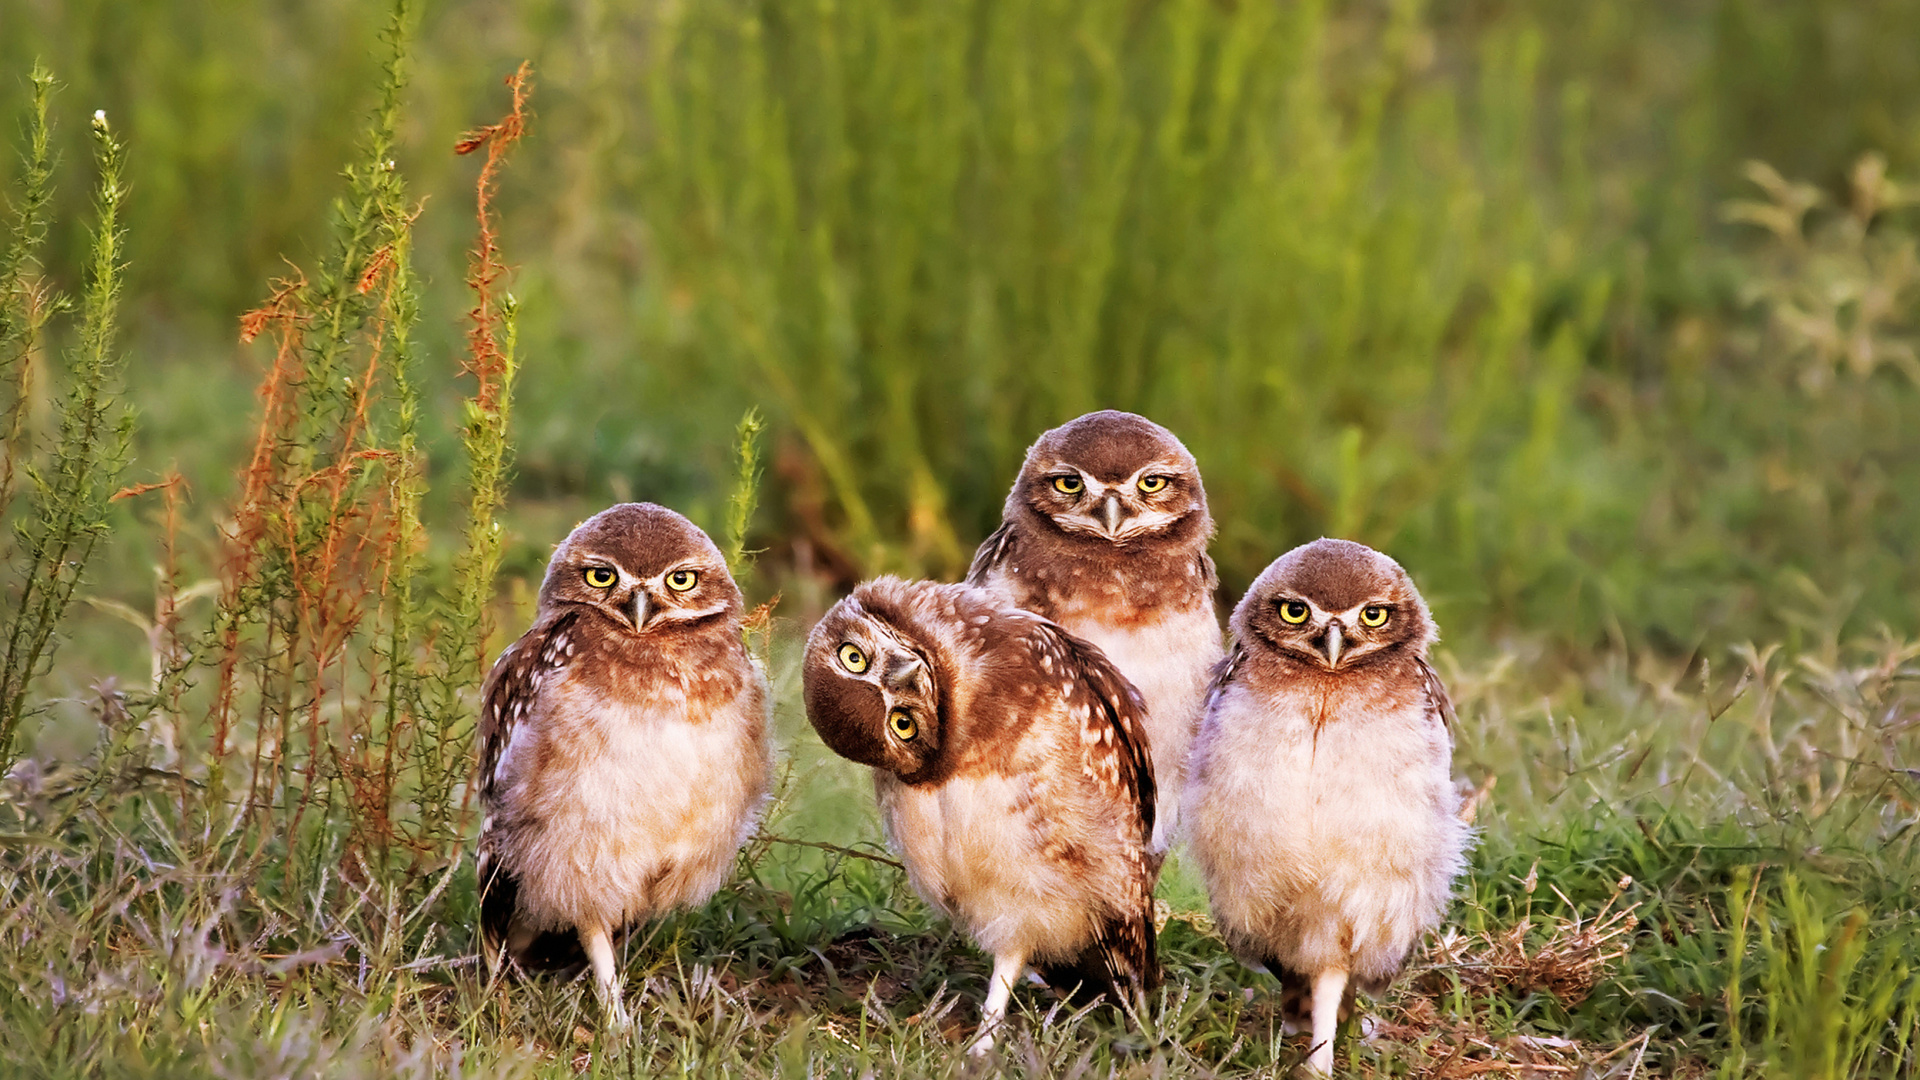 Morning with owls wallpaper 1920x1080